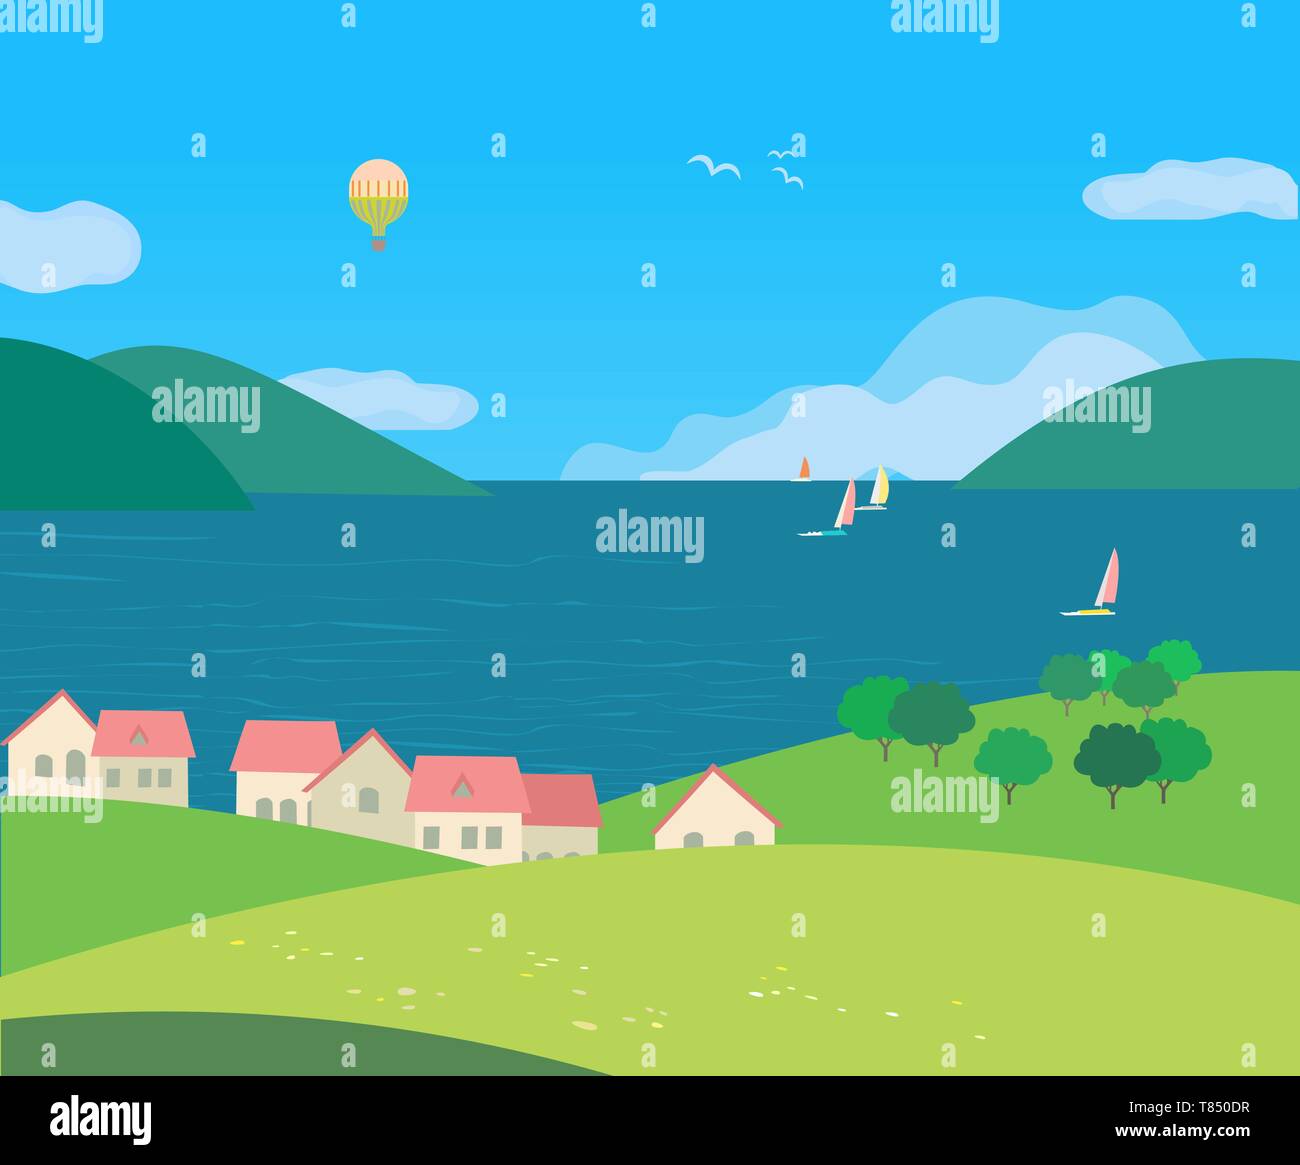 Landscape with village rural houses on seaside cartoon Stock Vector